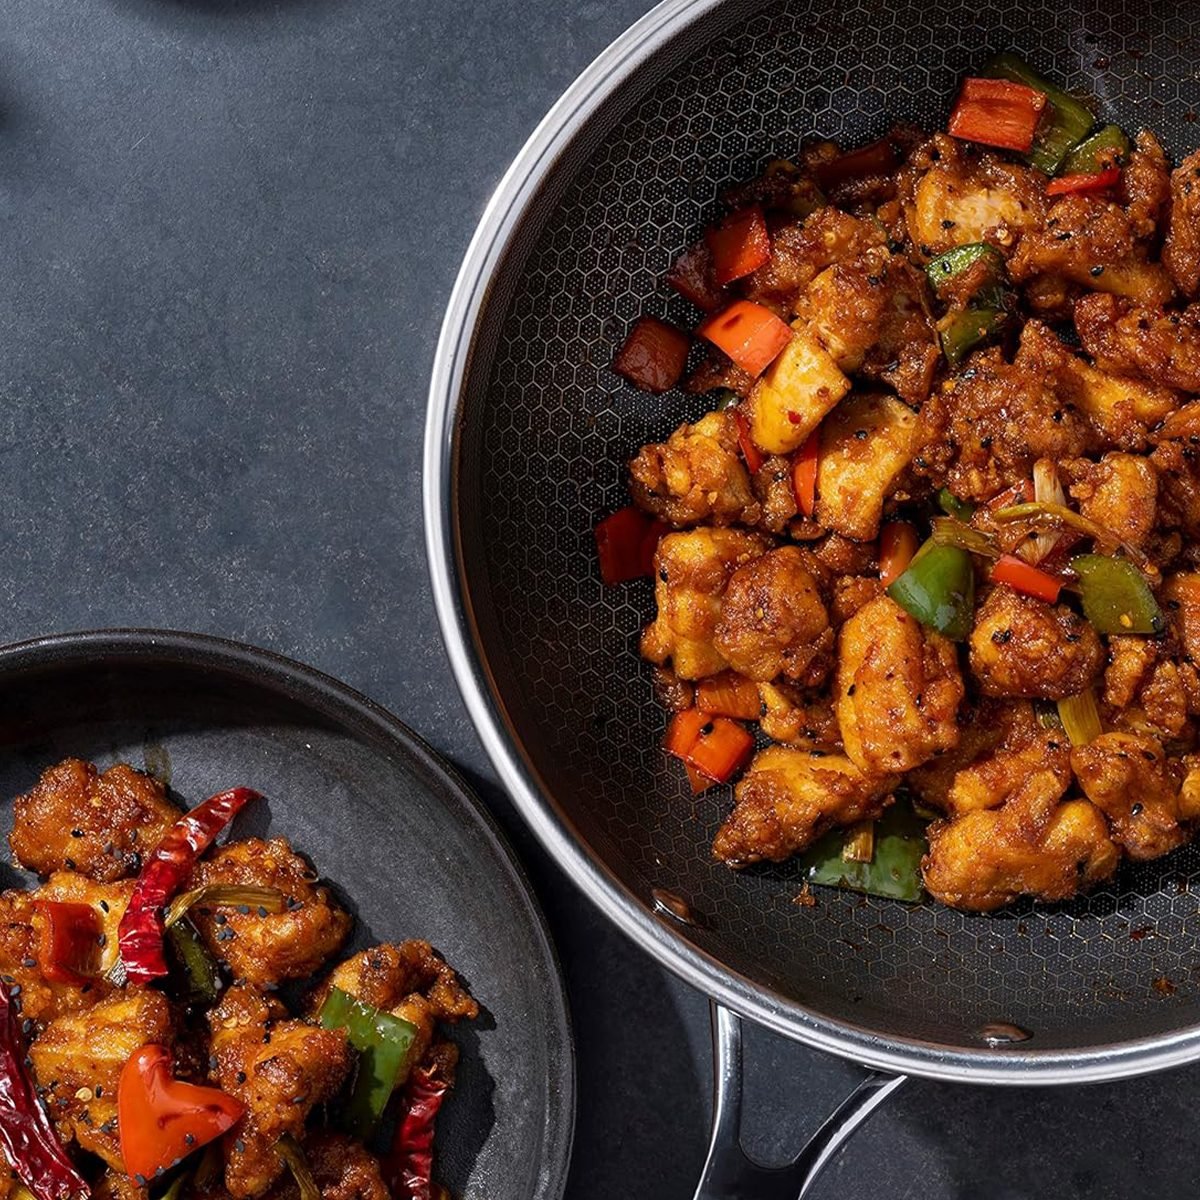 HexClad Is Offering a Hybrid Wok for Free During Its Labor Day